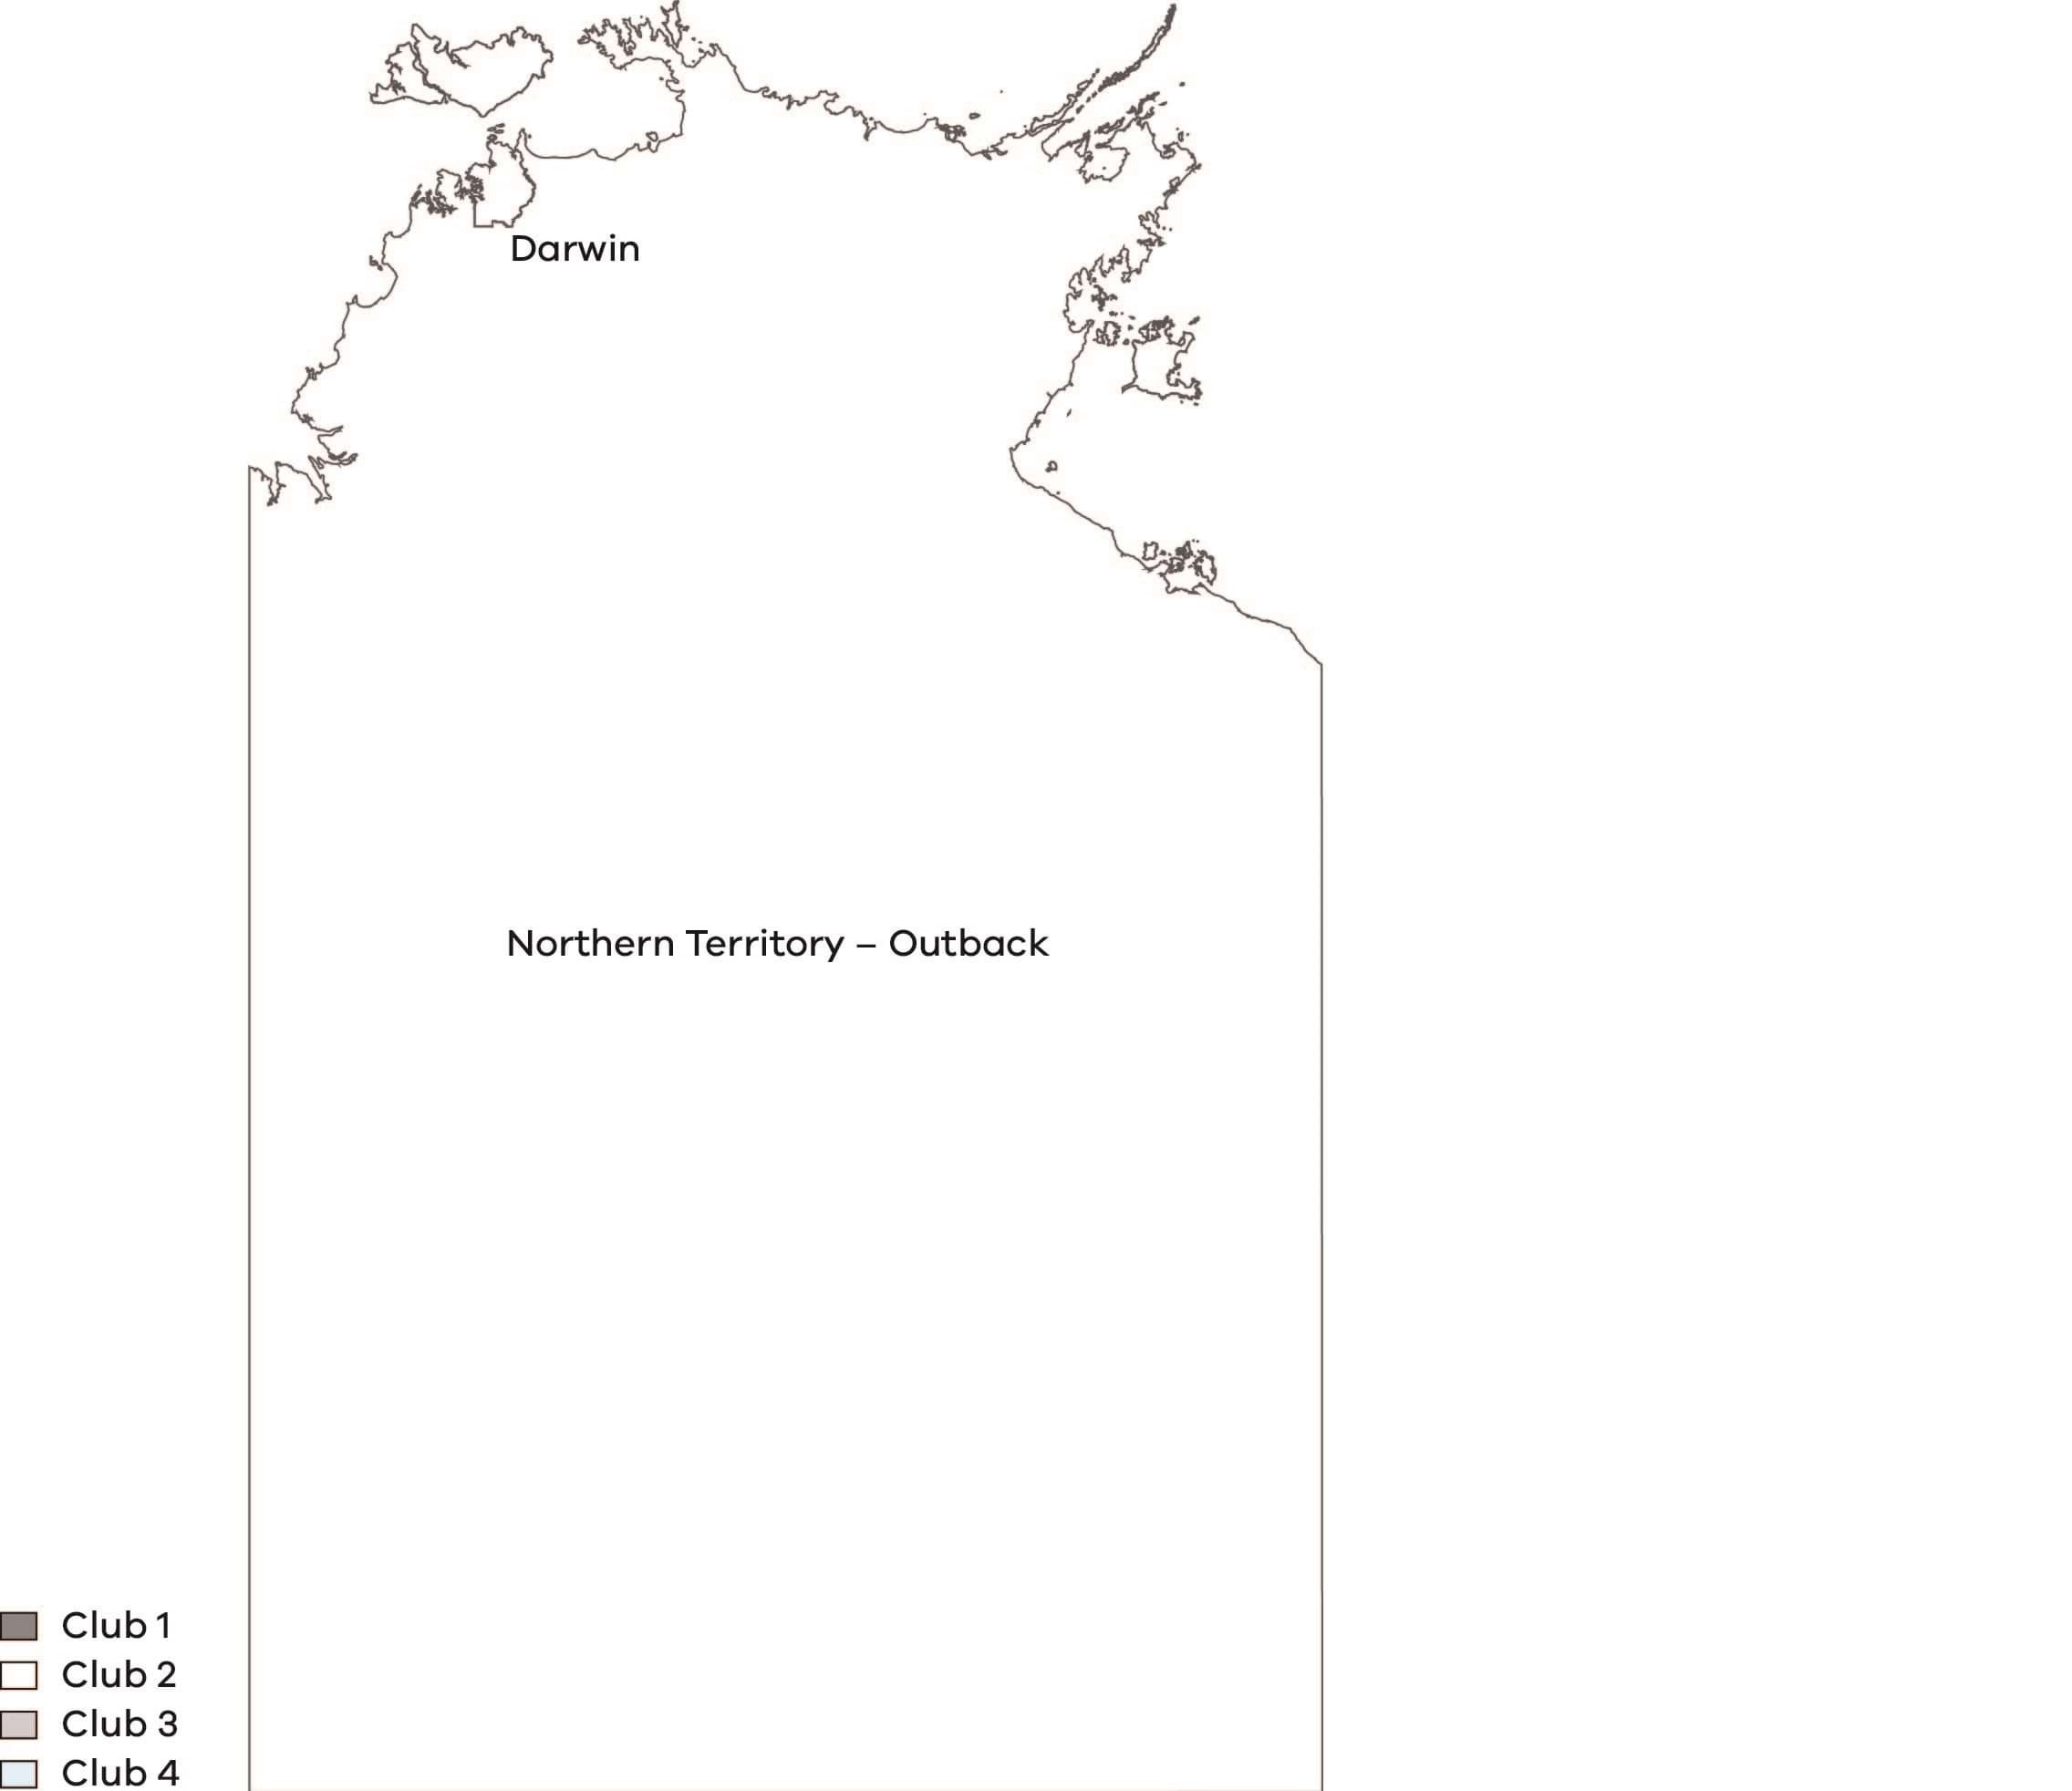 Club composition in Northern Territory